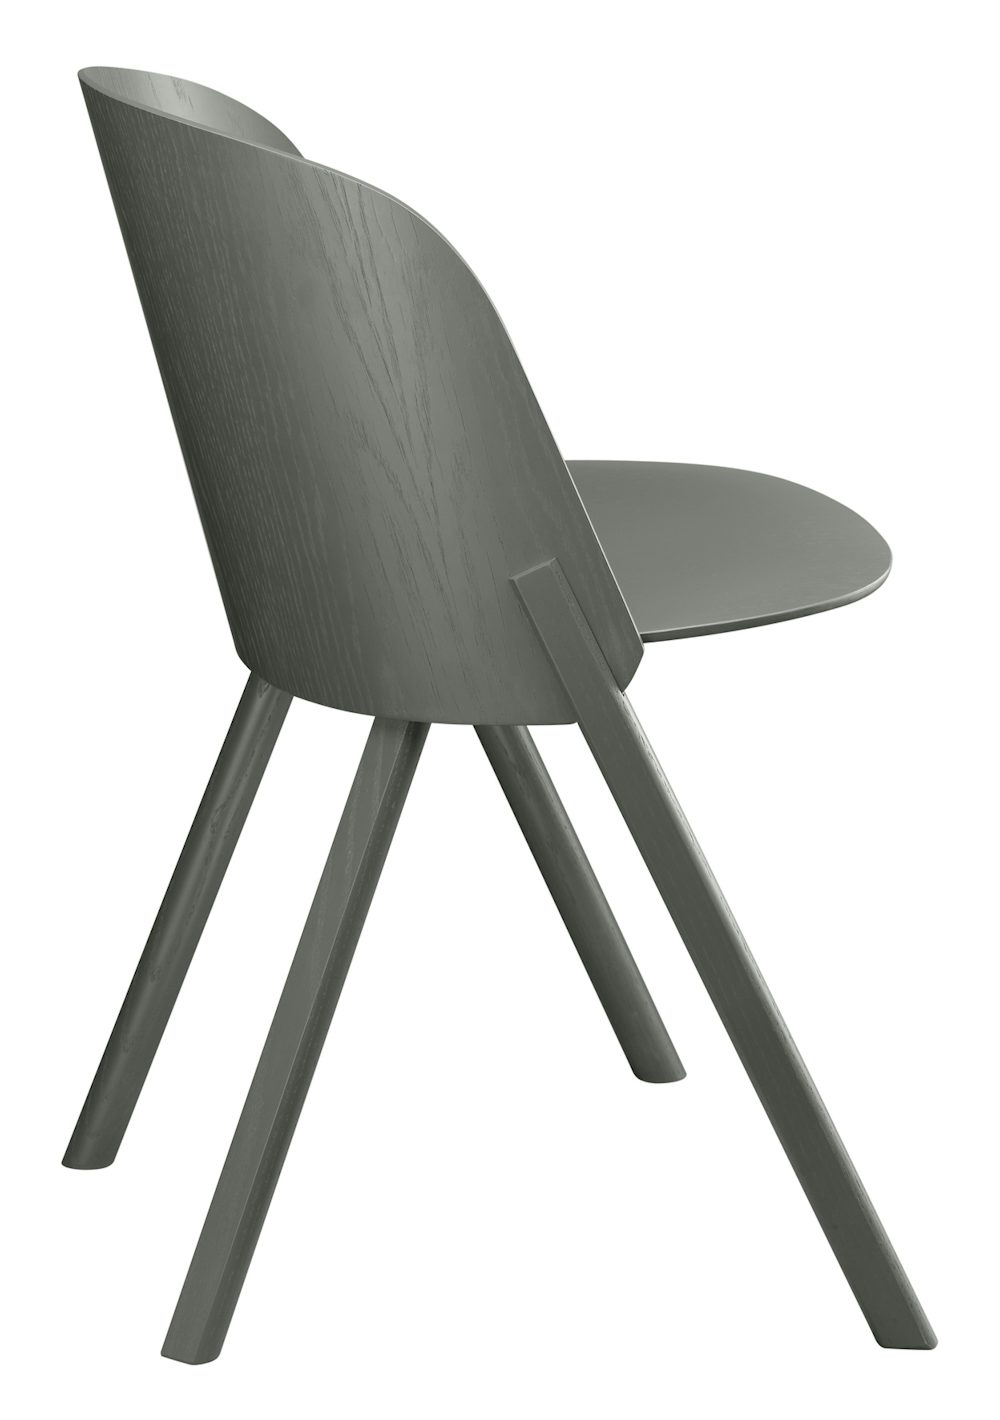 e15 this side chair in umbra grey